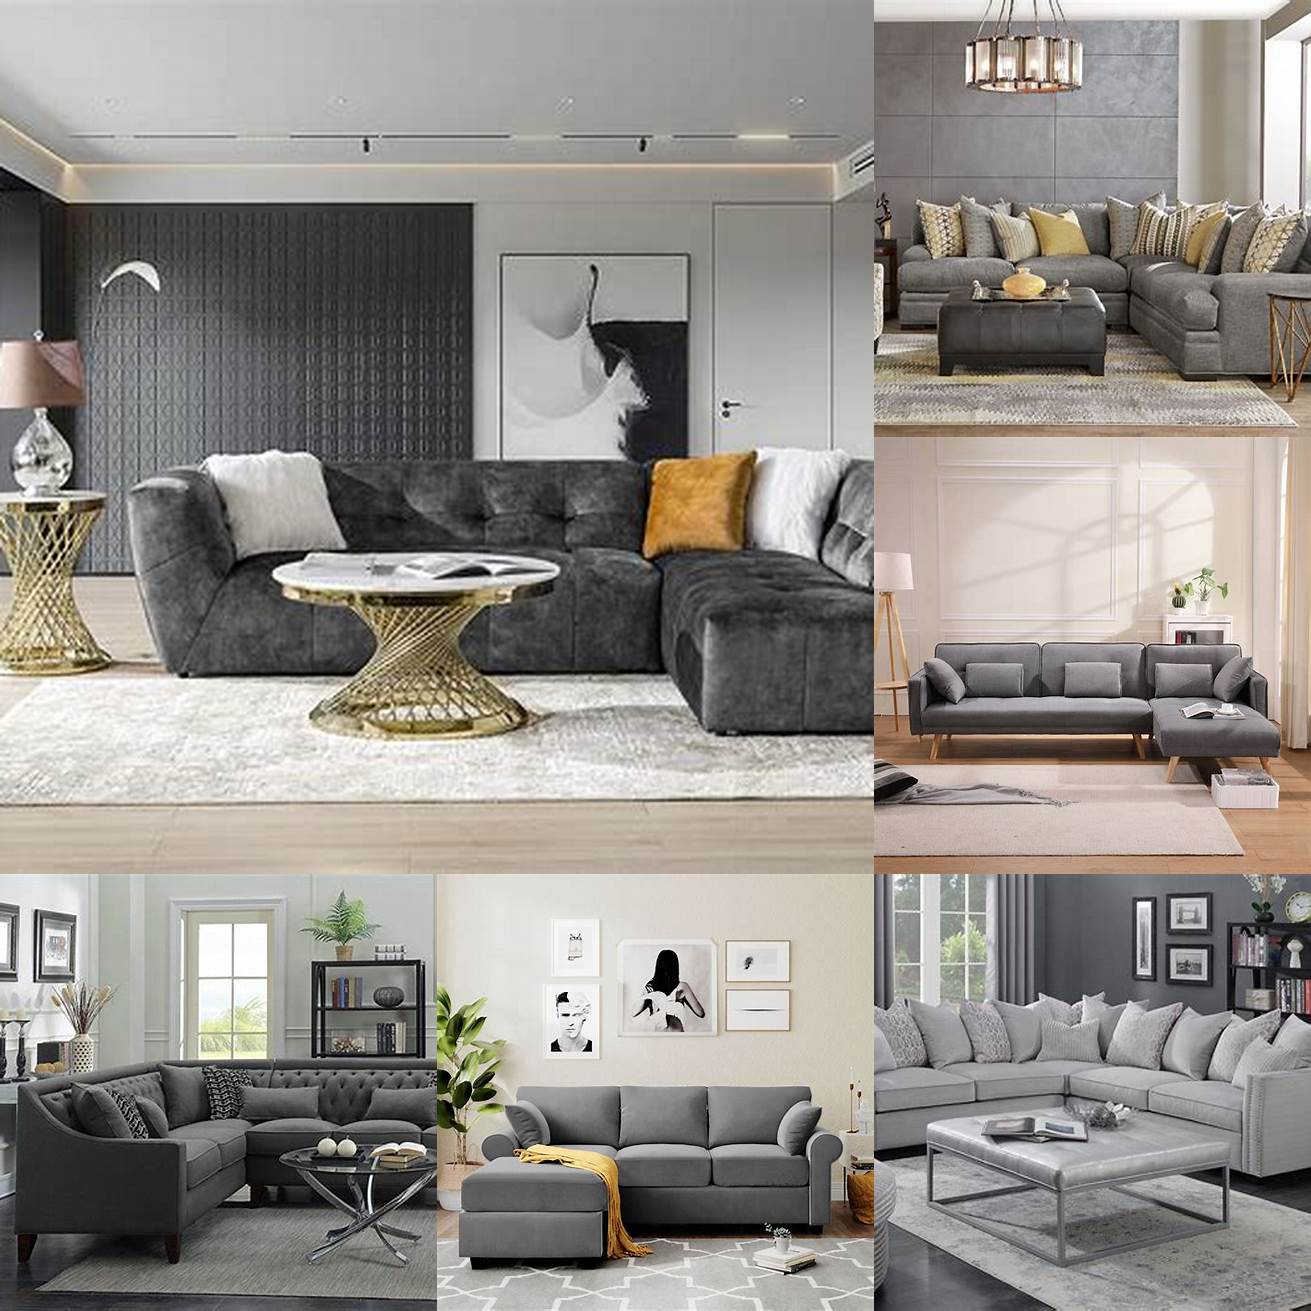 Image 1 A chic gray modern sectional sofa in a minimalist living room